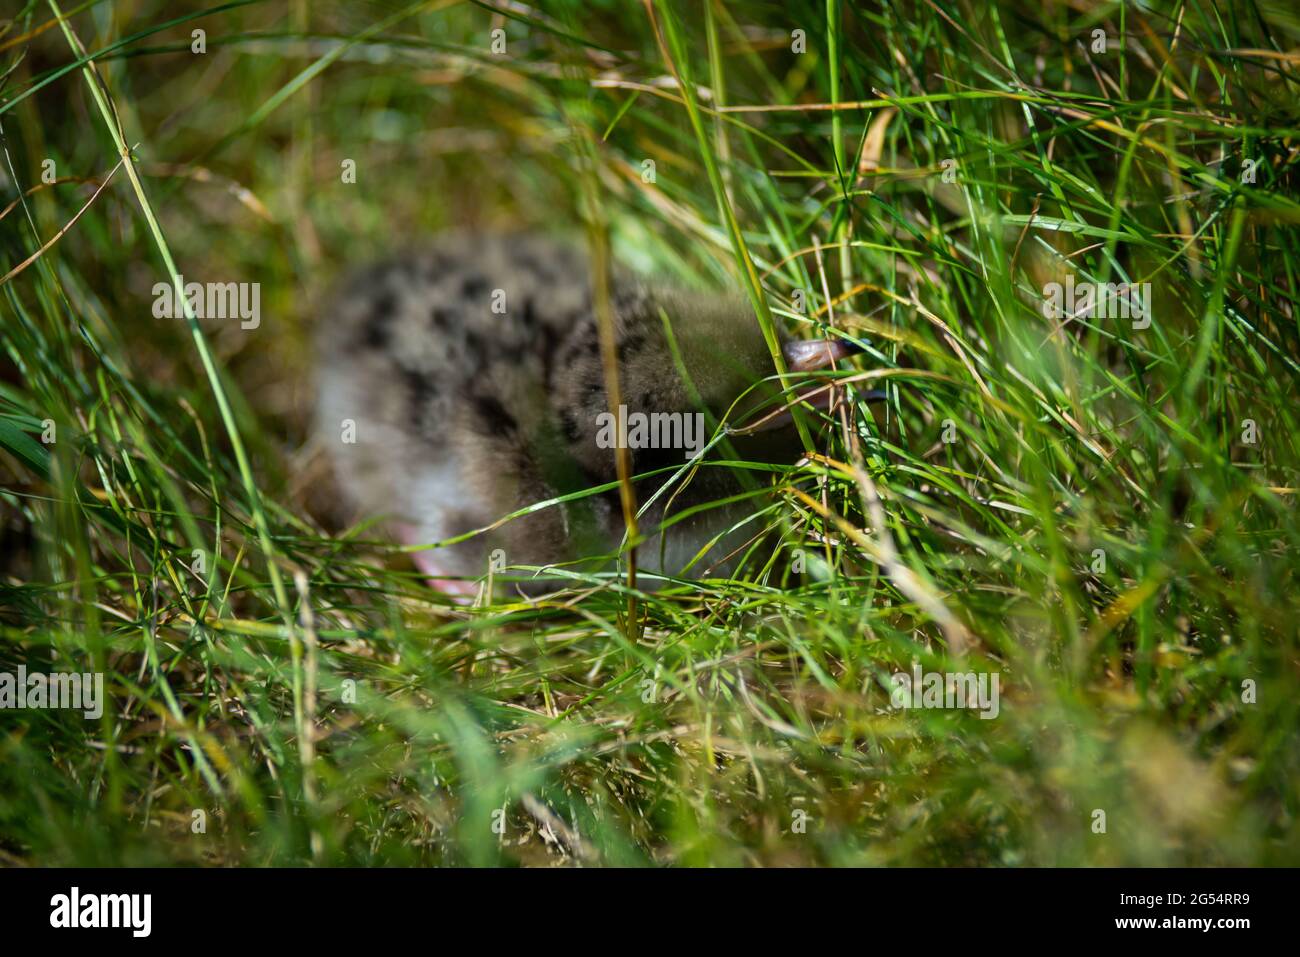 baby seagull chick hiding among the green grass Stock Photo